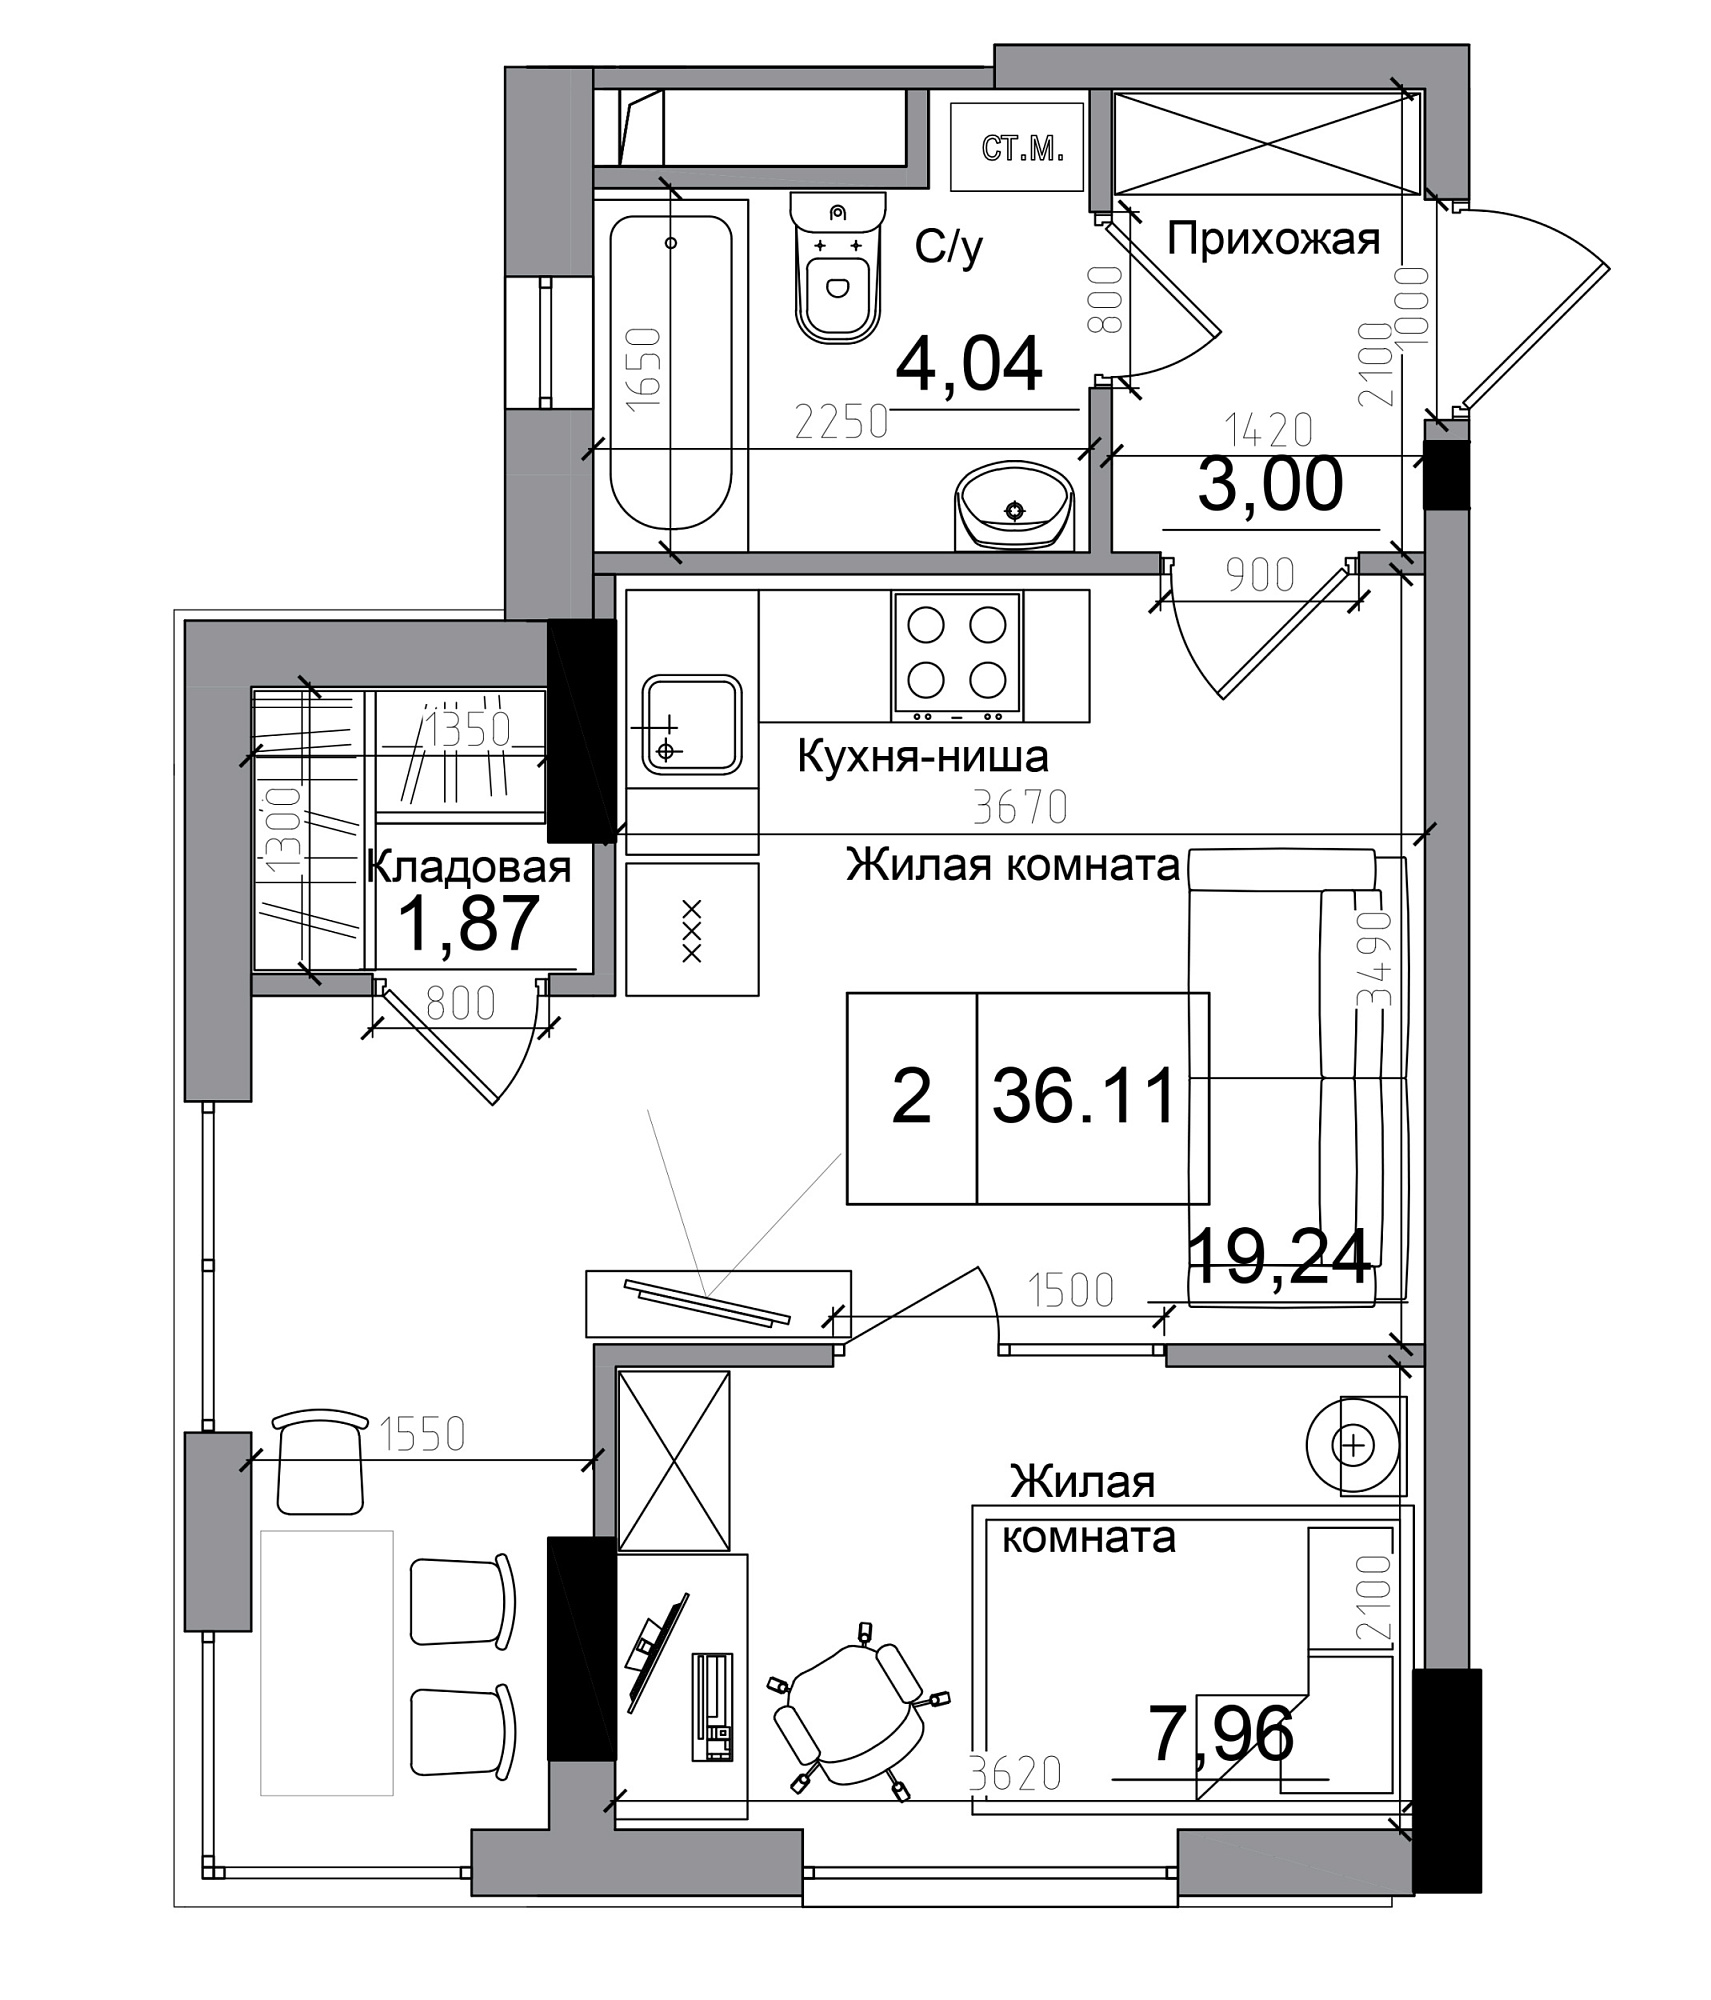 Planning 1-rm flats area 36.11m2, AB-11-11/00004.